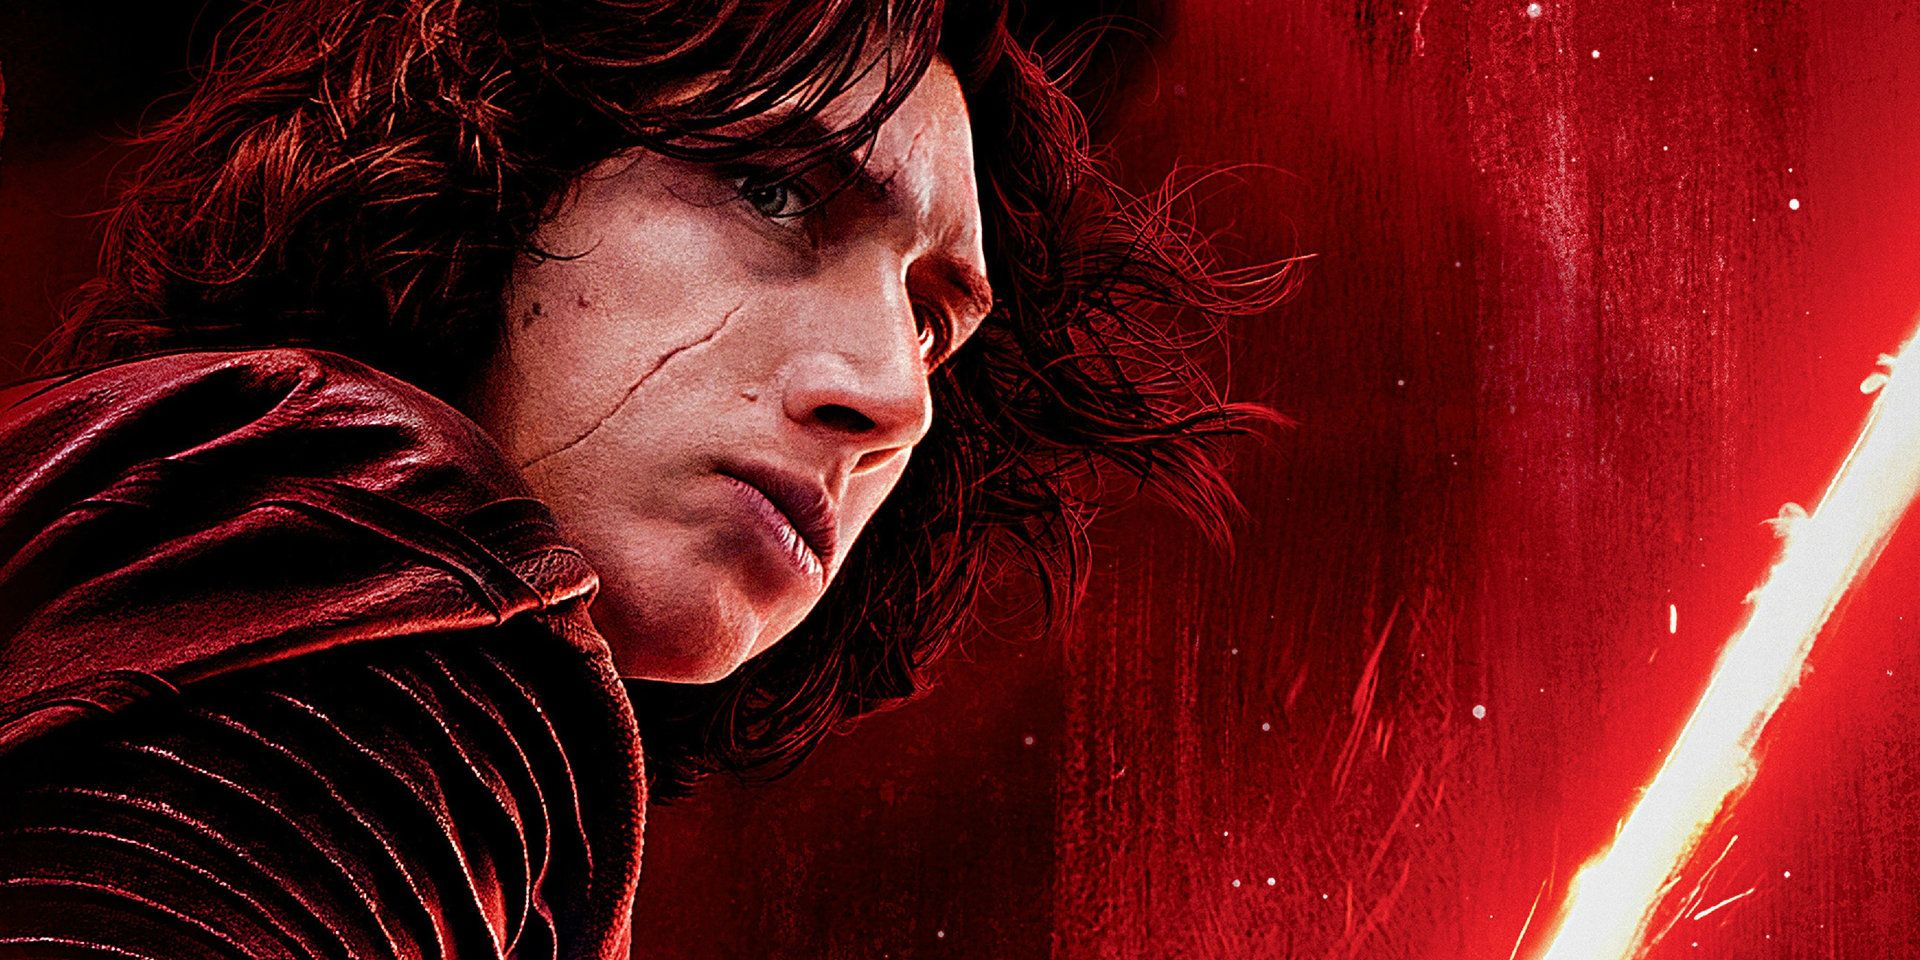 Star Wars meets Devil May Cry 5 thanks to this Kylo Ren mod